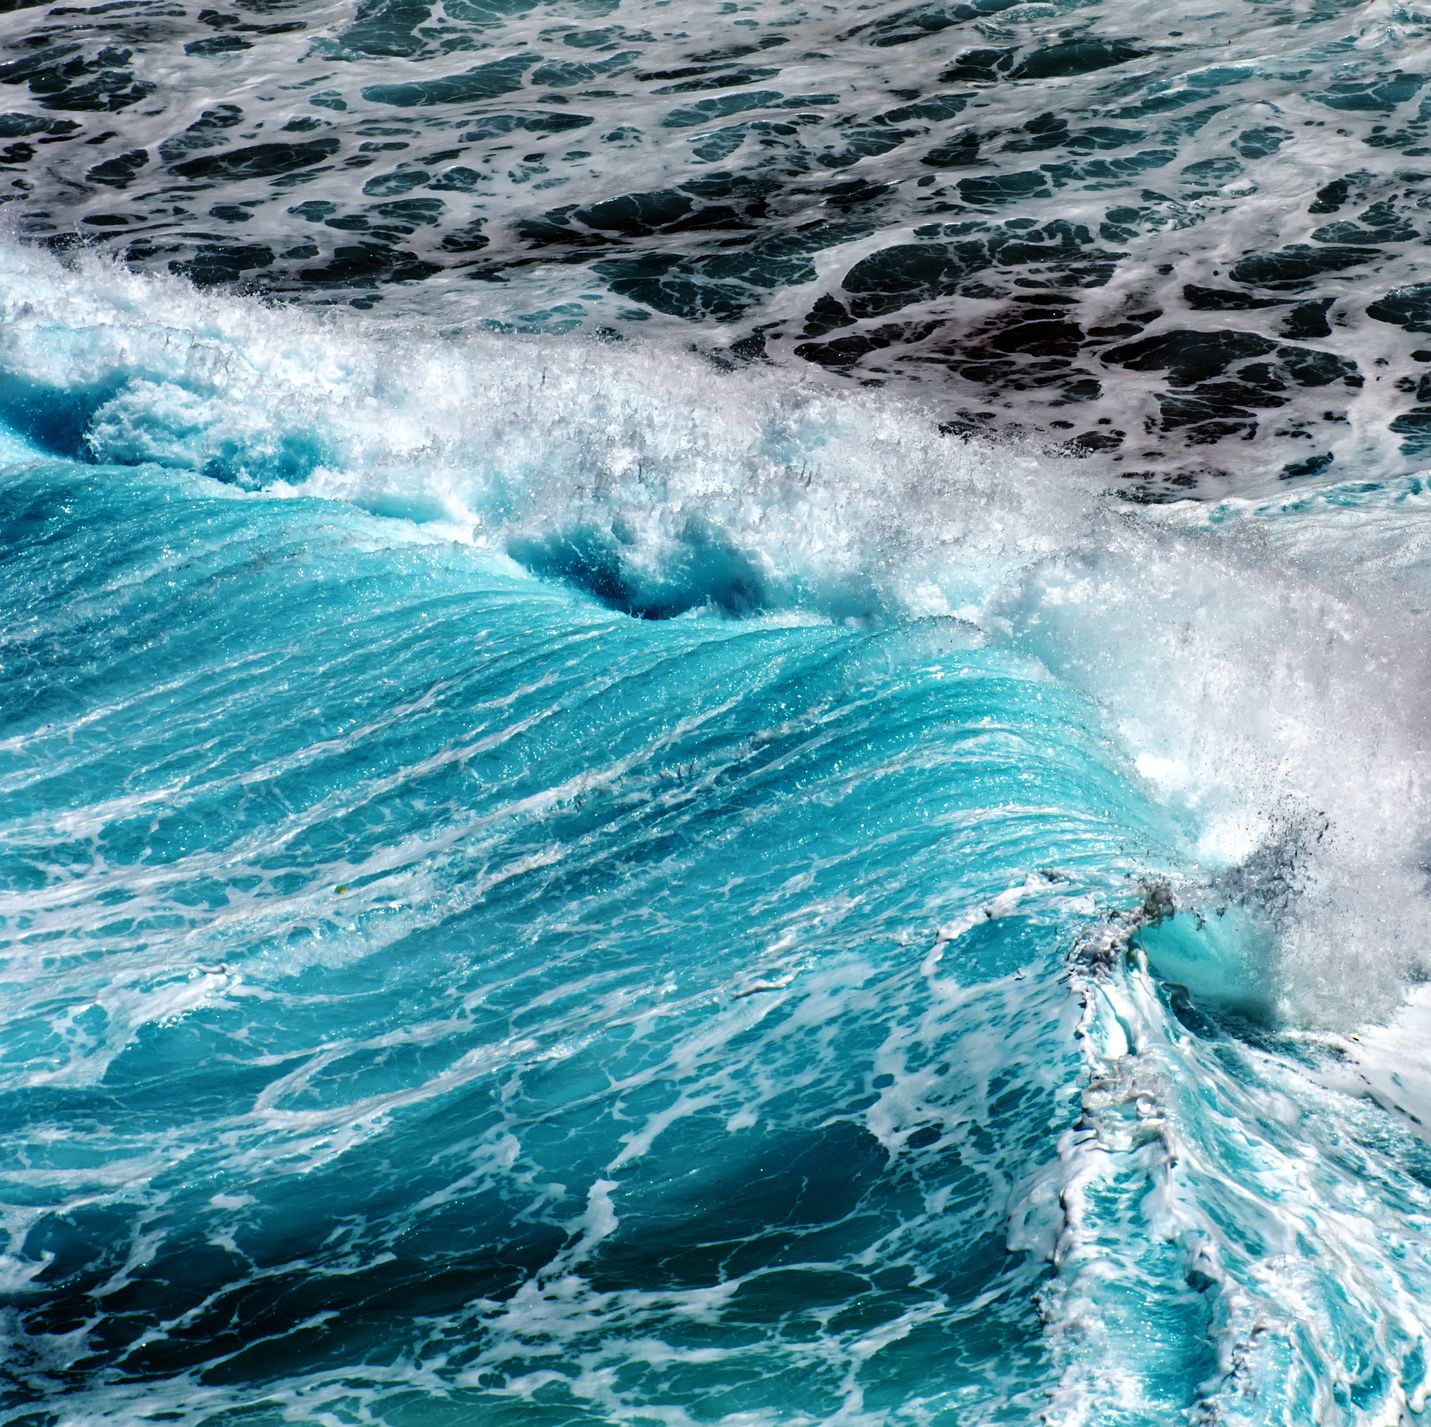 The Engine That Drives Our Oceans Is Slowing—And That Could End Life as We Know It